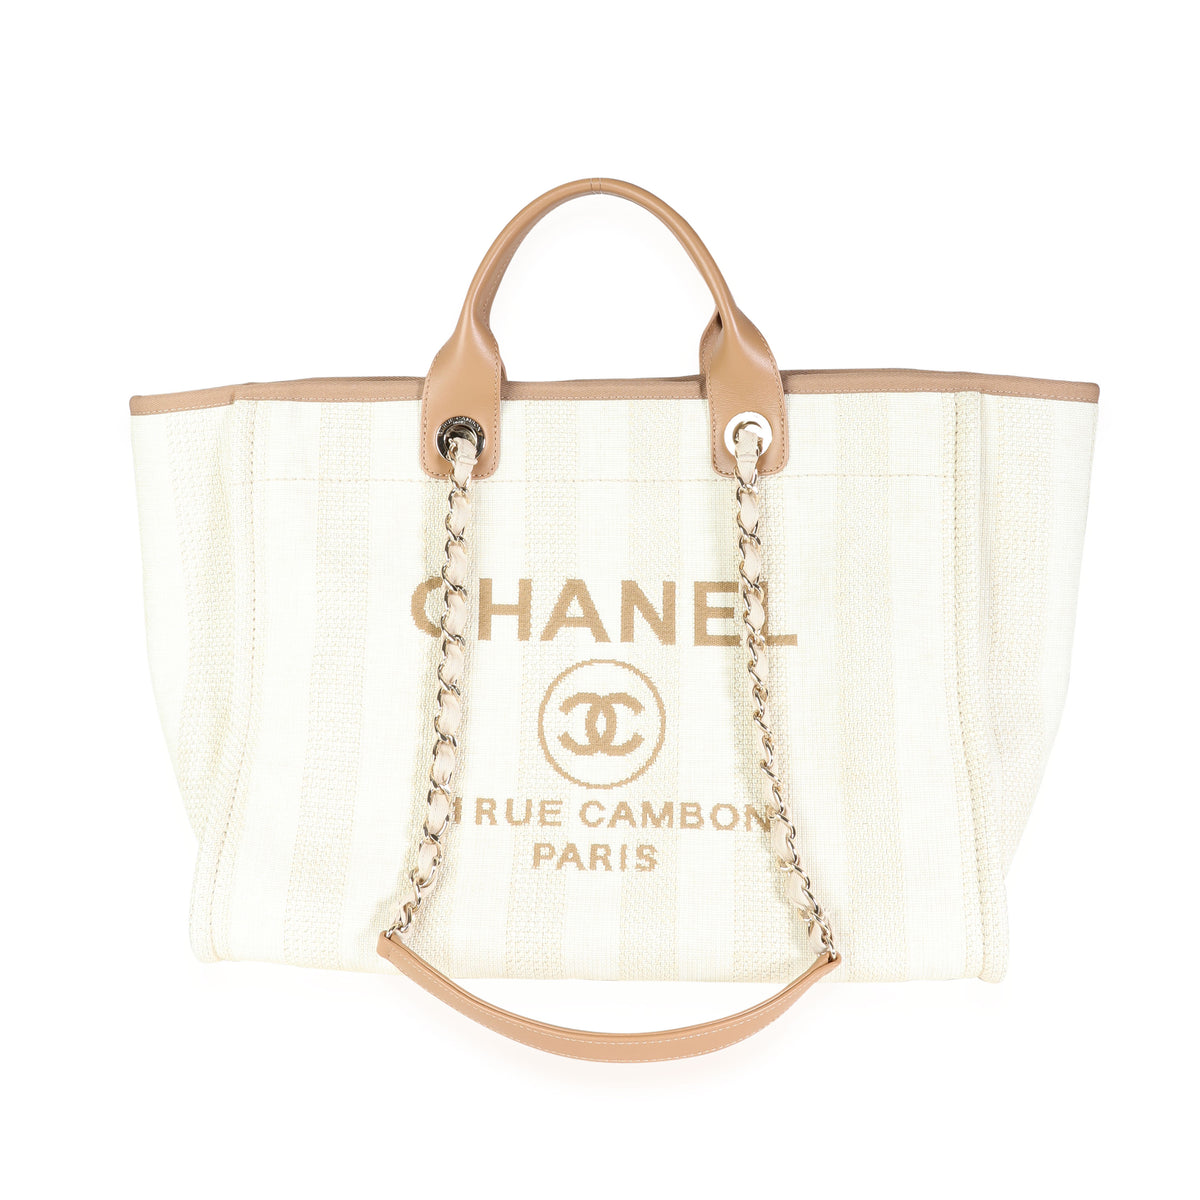 Chanel White Leather Large Deauville Tote